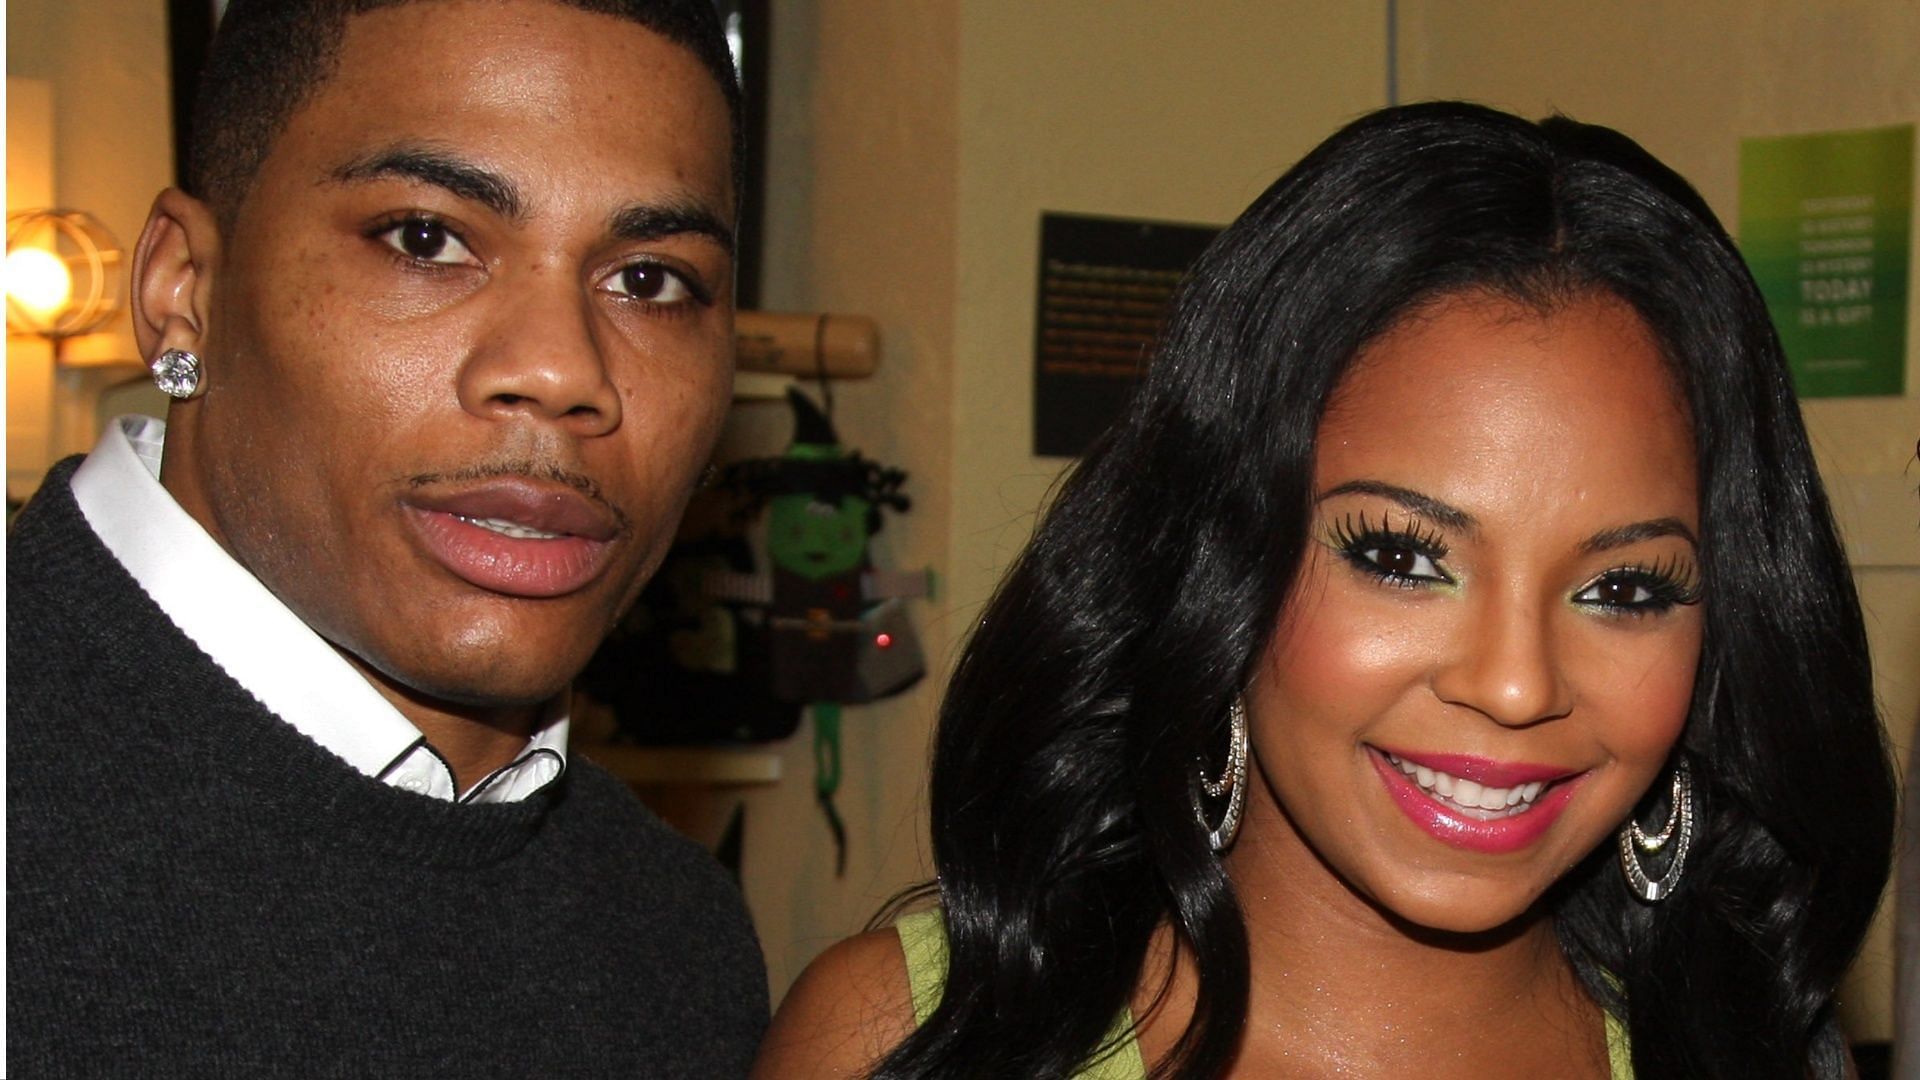 Nelly and Ashanti. (Photo via Getty Images)